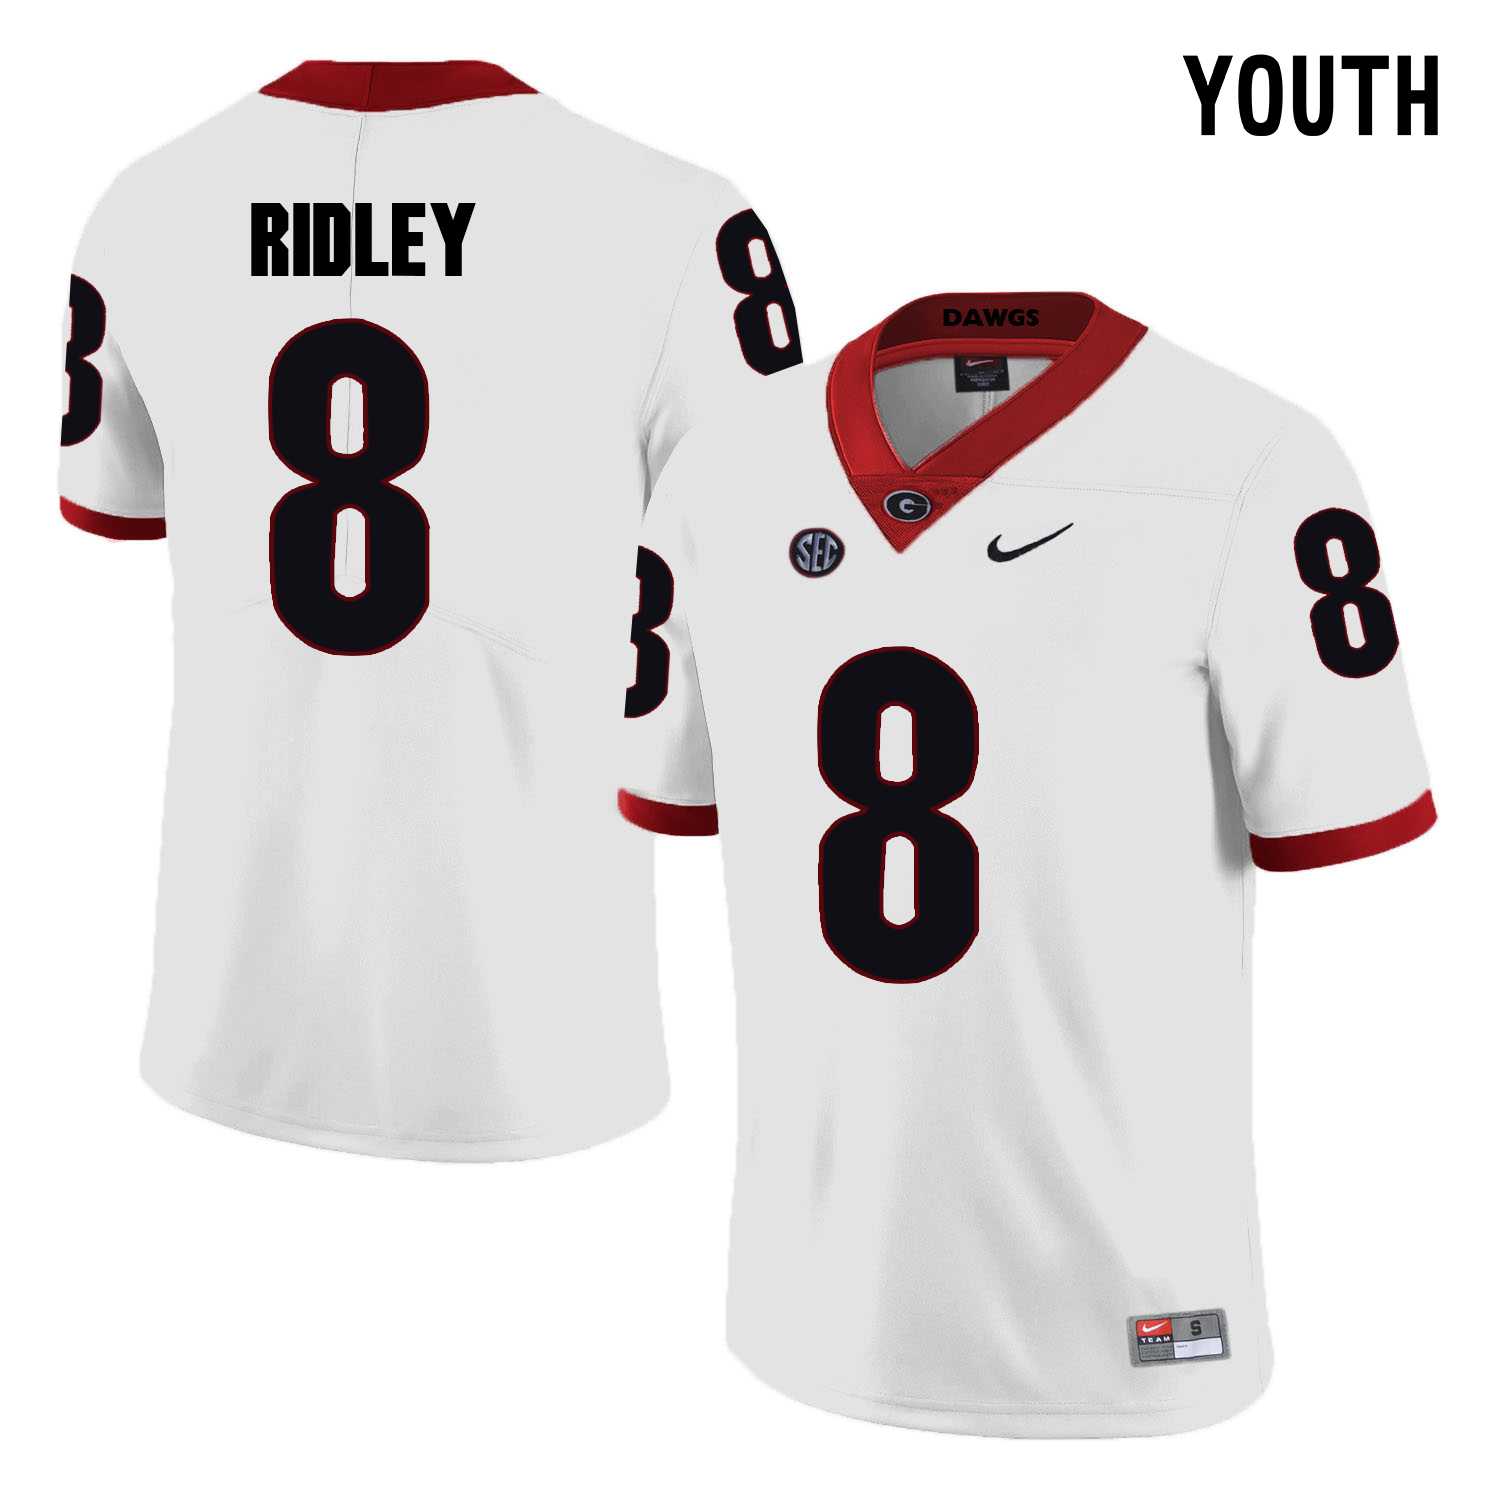 Georgia Bulldogs 8 Riley Ridley White Youth College Football Jersey DingZhi